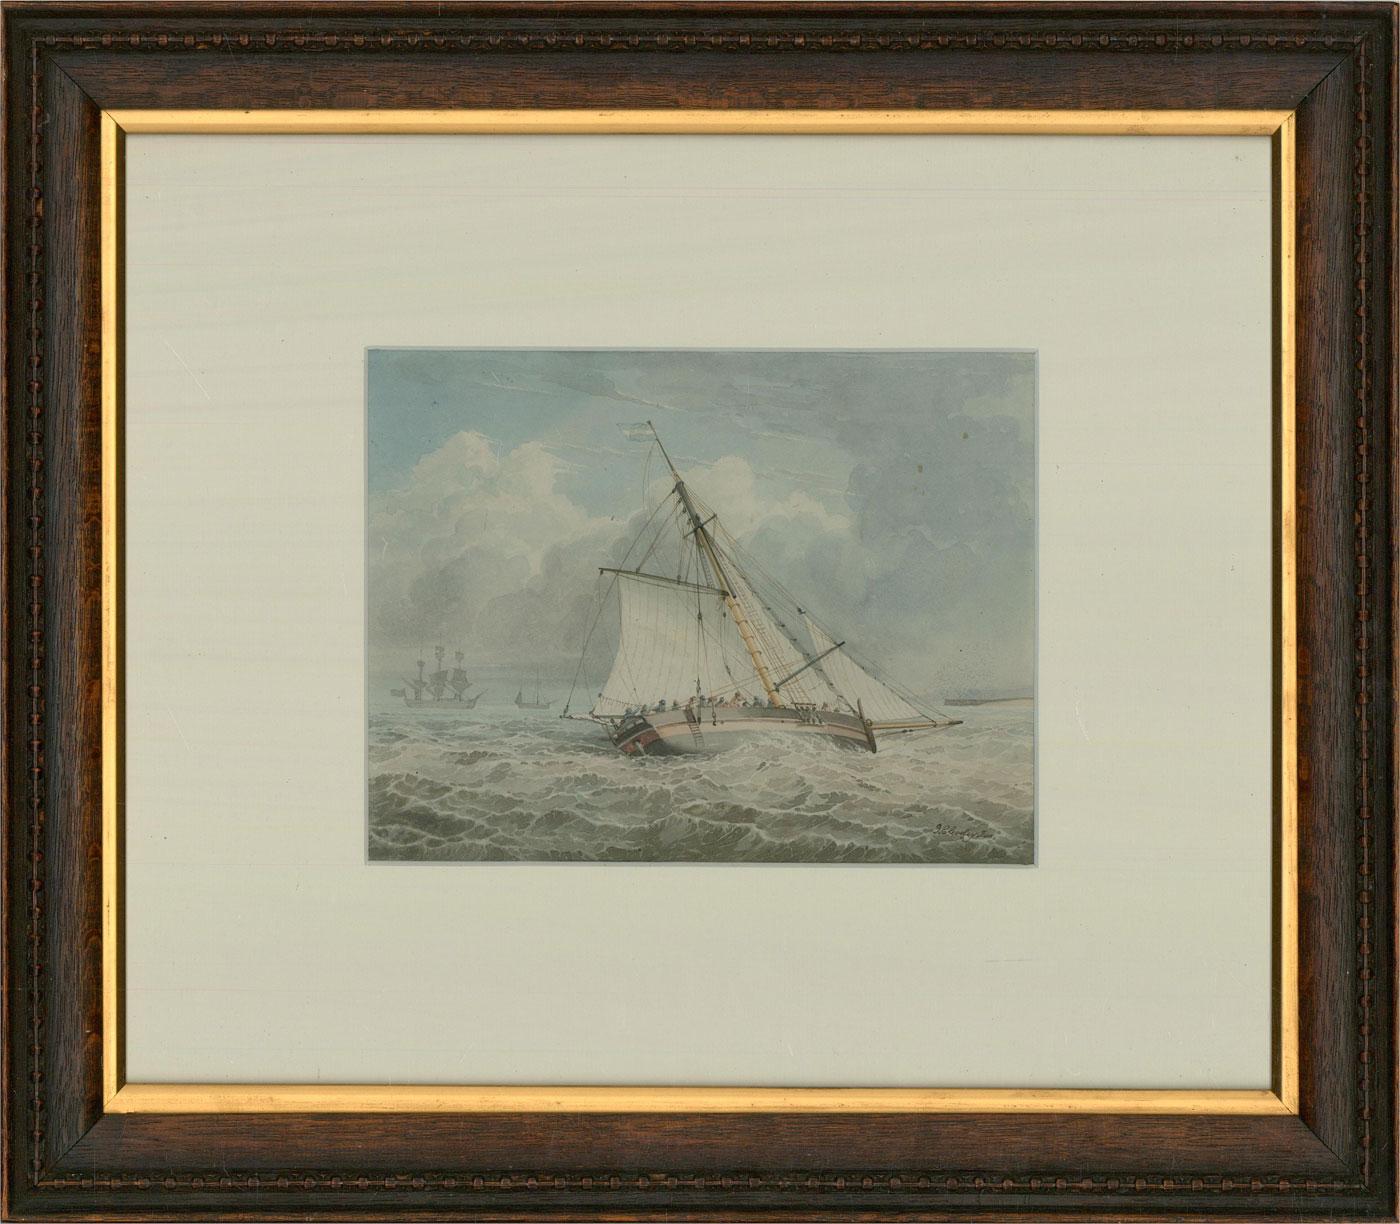 A fine 18th century watercolour of a cutter at sea by the prominent maritime artist John Cleveley the Younger (1747-1786). Presented glazed in a white mount and an oak frame with beaded detailing and a gilt-effect inner edge. Signed to the